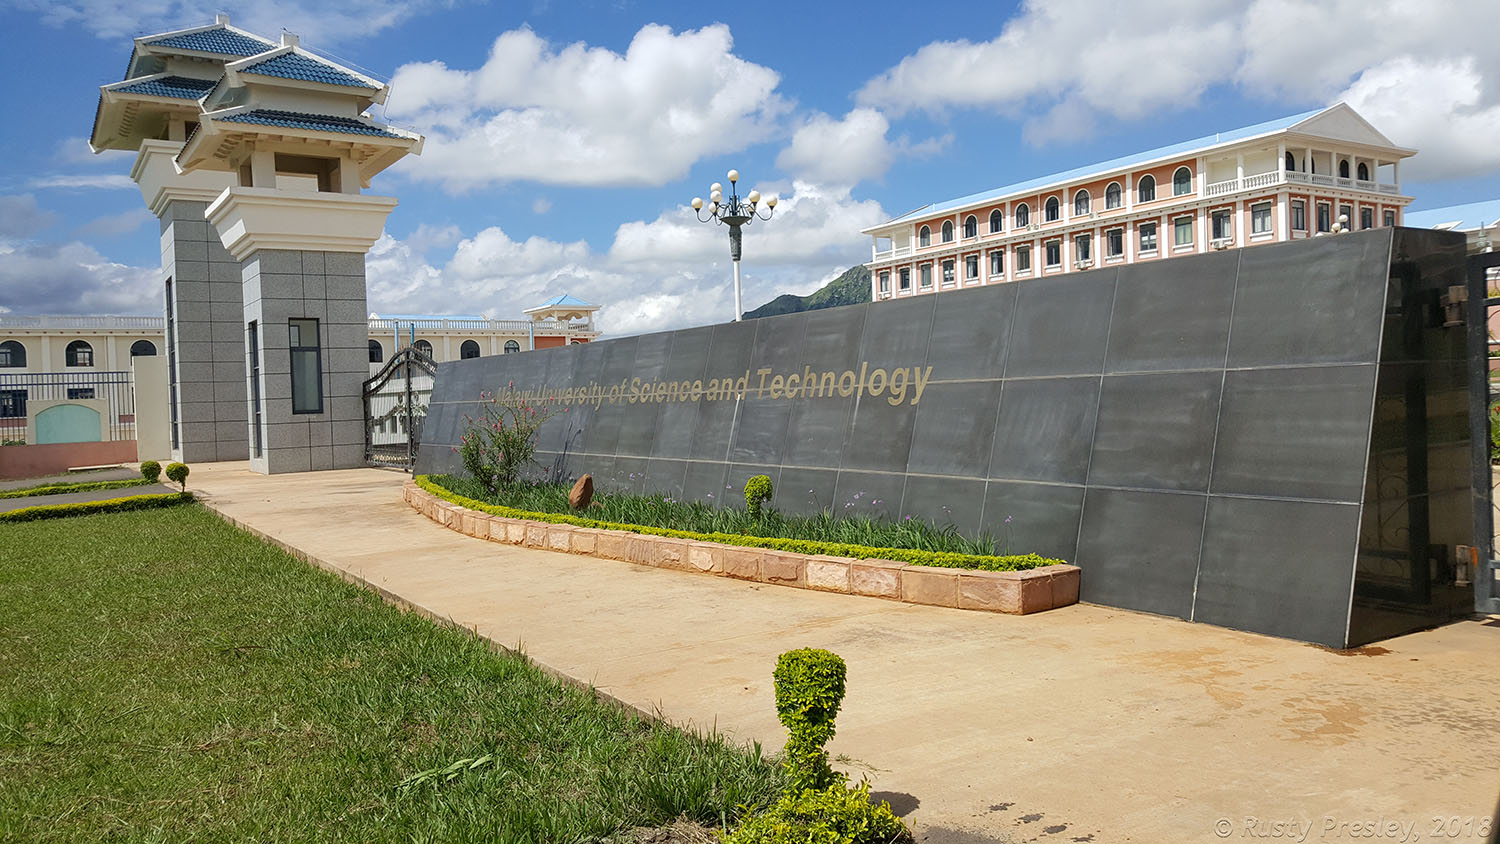 Outside of the Malawi University of Science and Technology